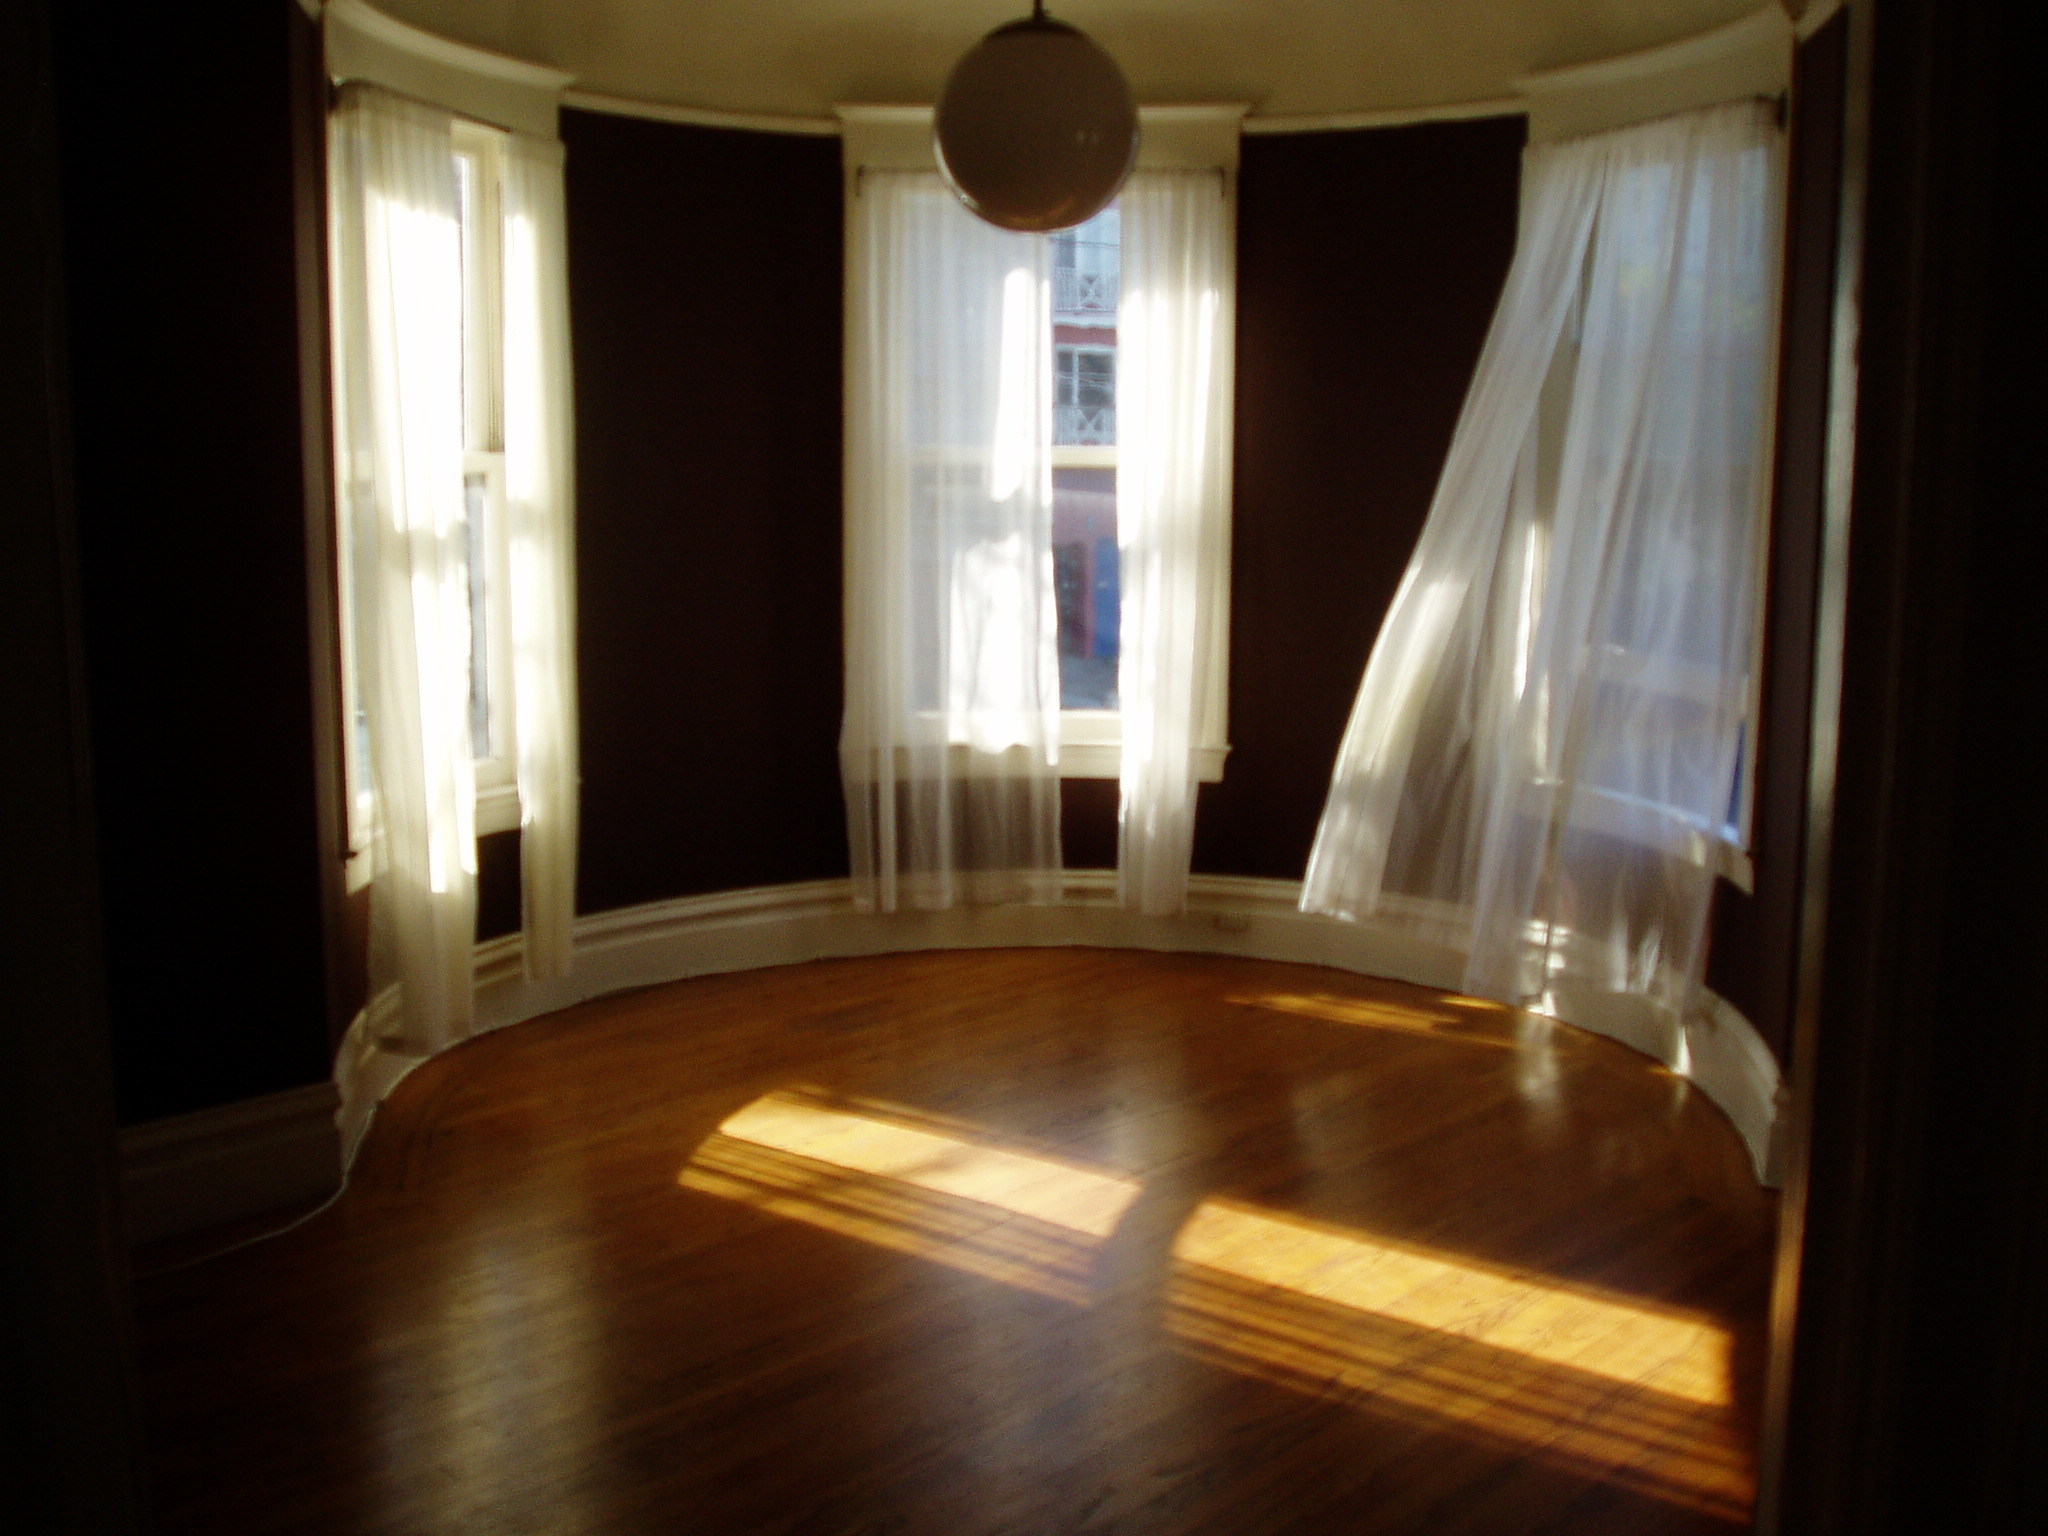 a large room with lots of windows, sheer curtains, and wooden floors